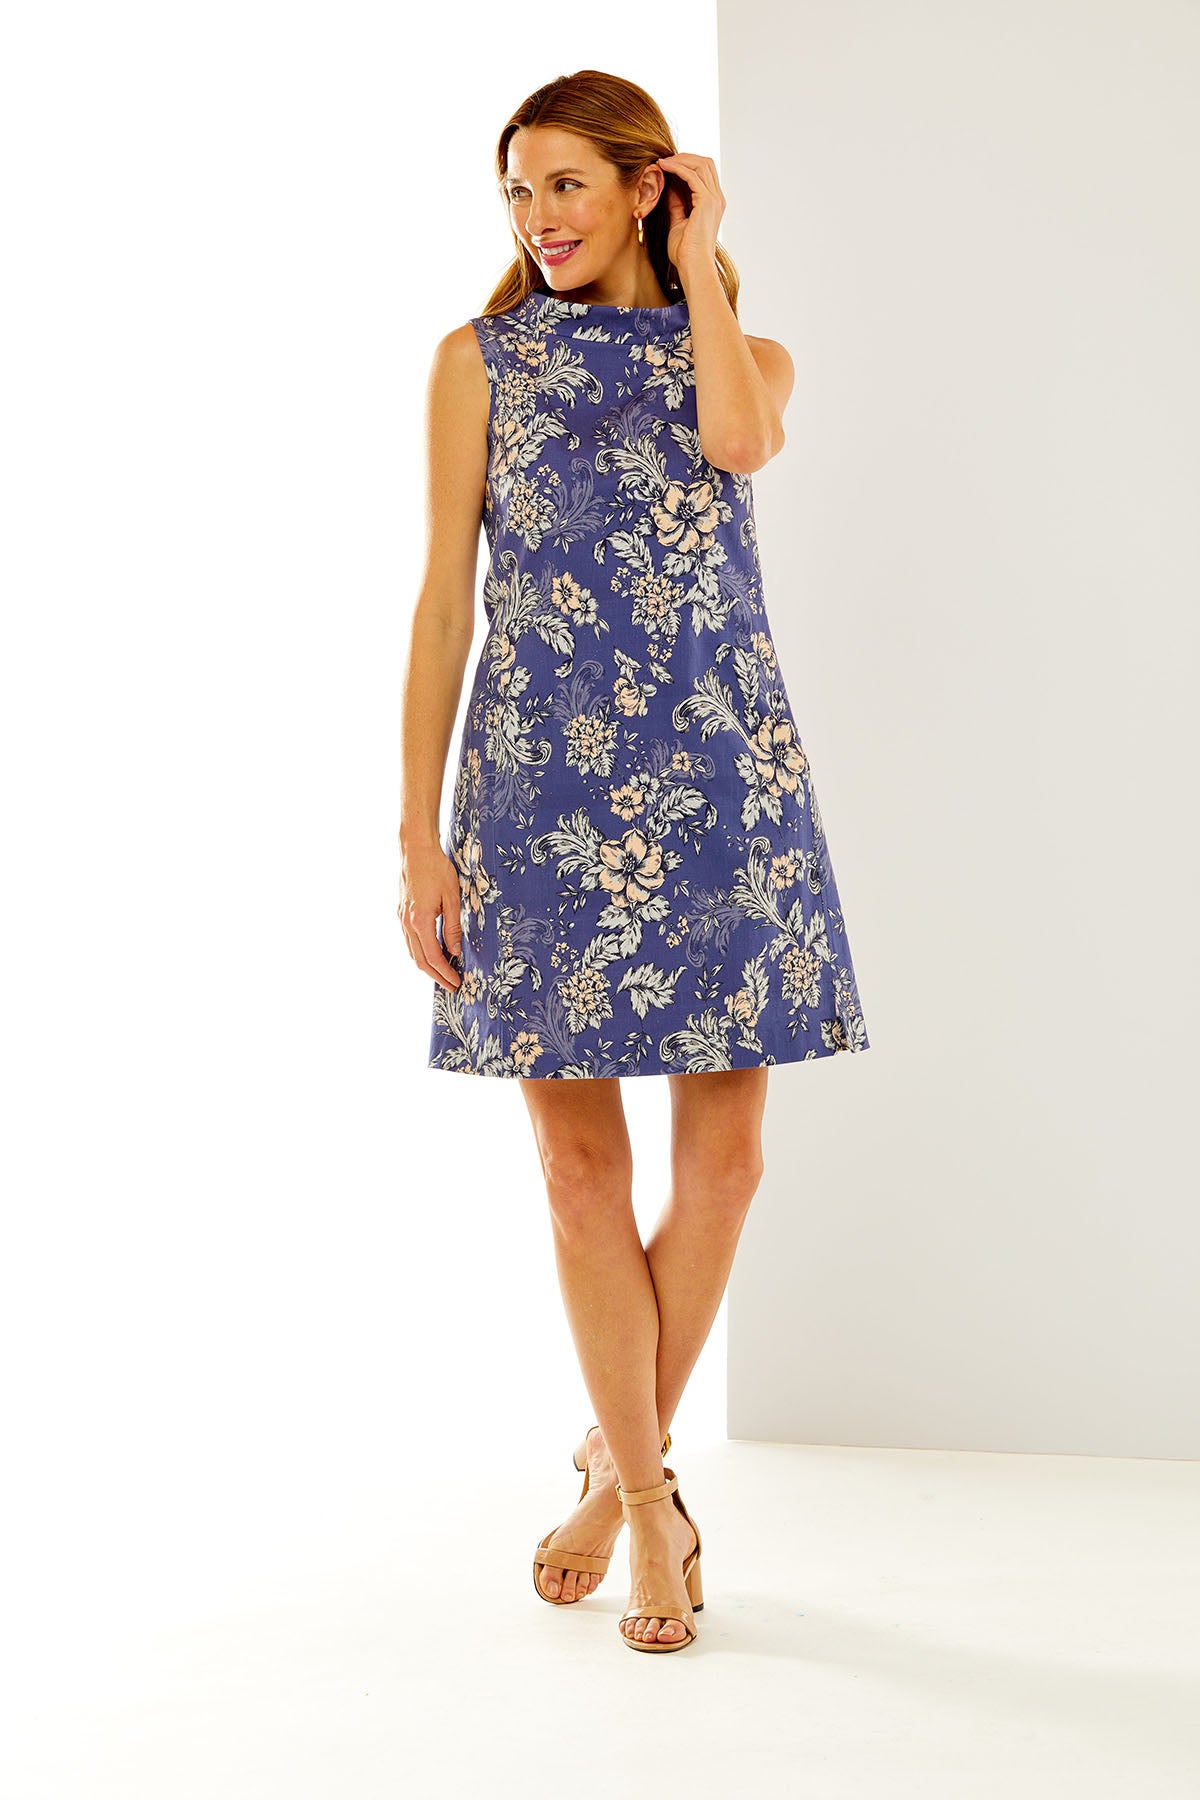 Woman in blue floral dress